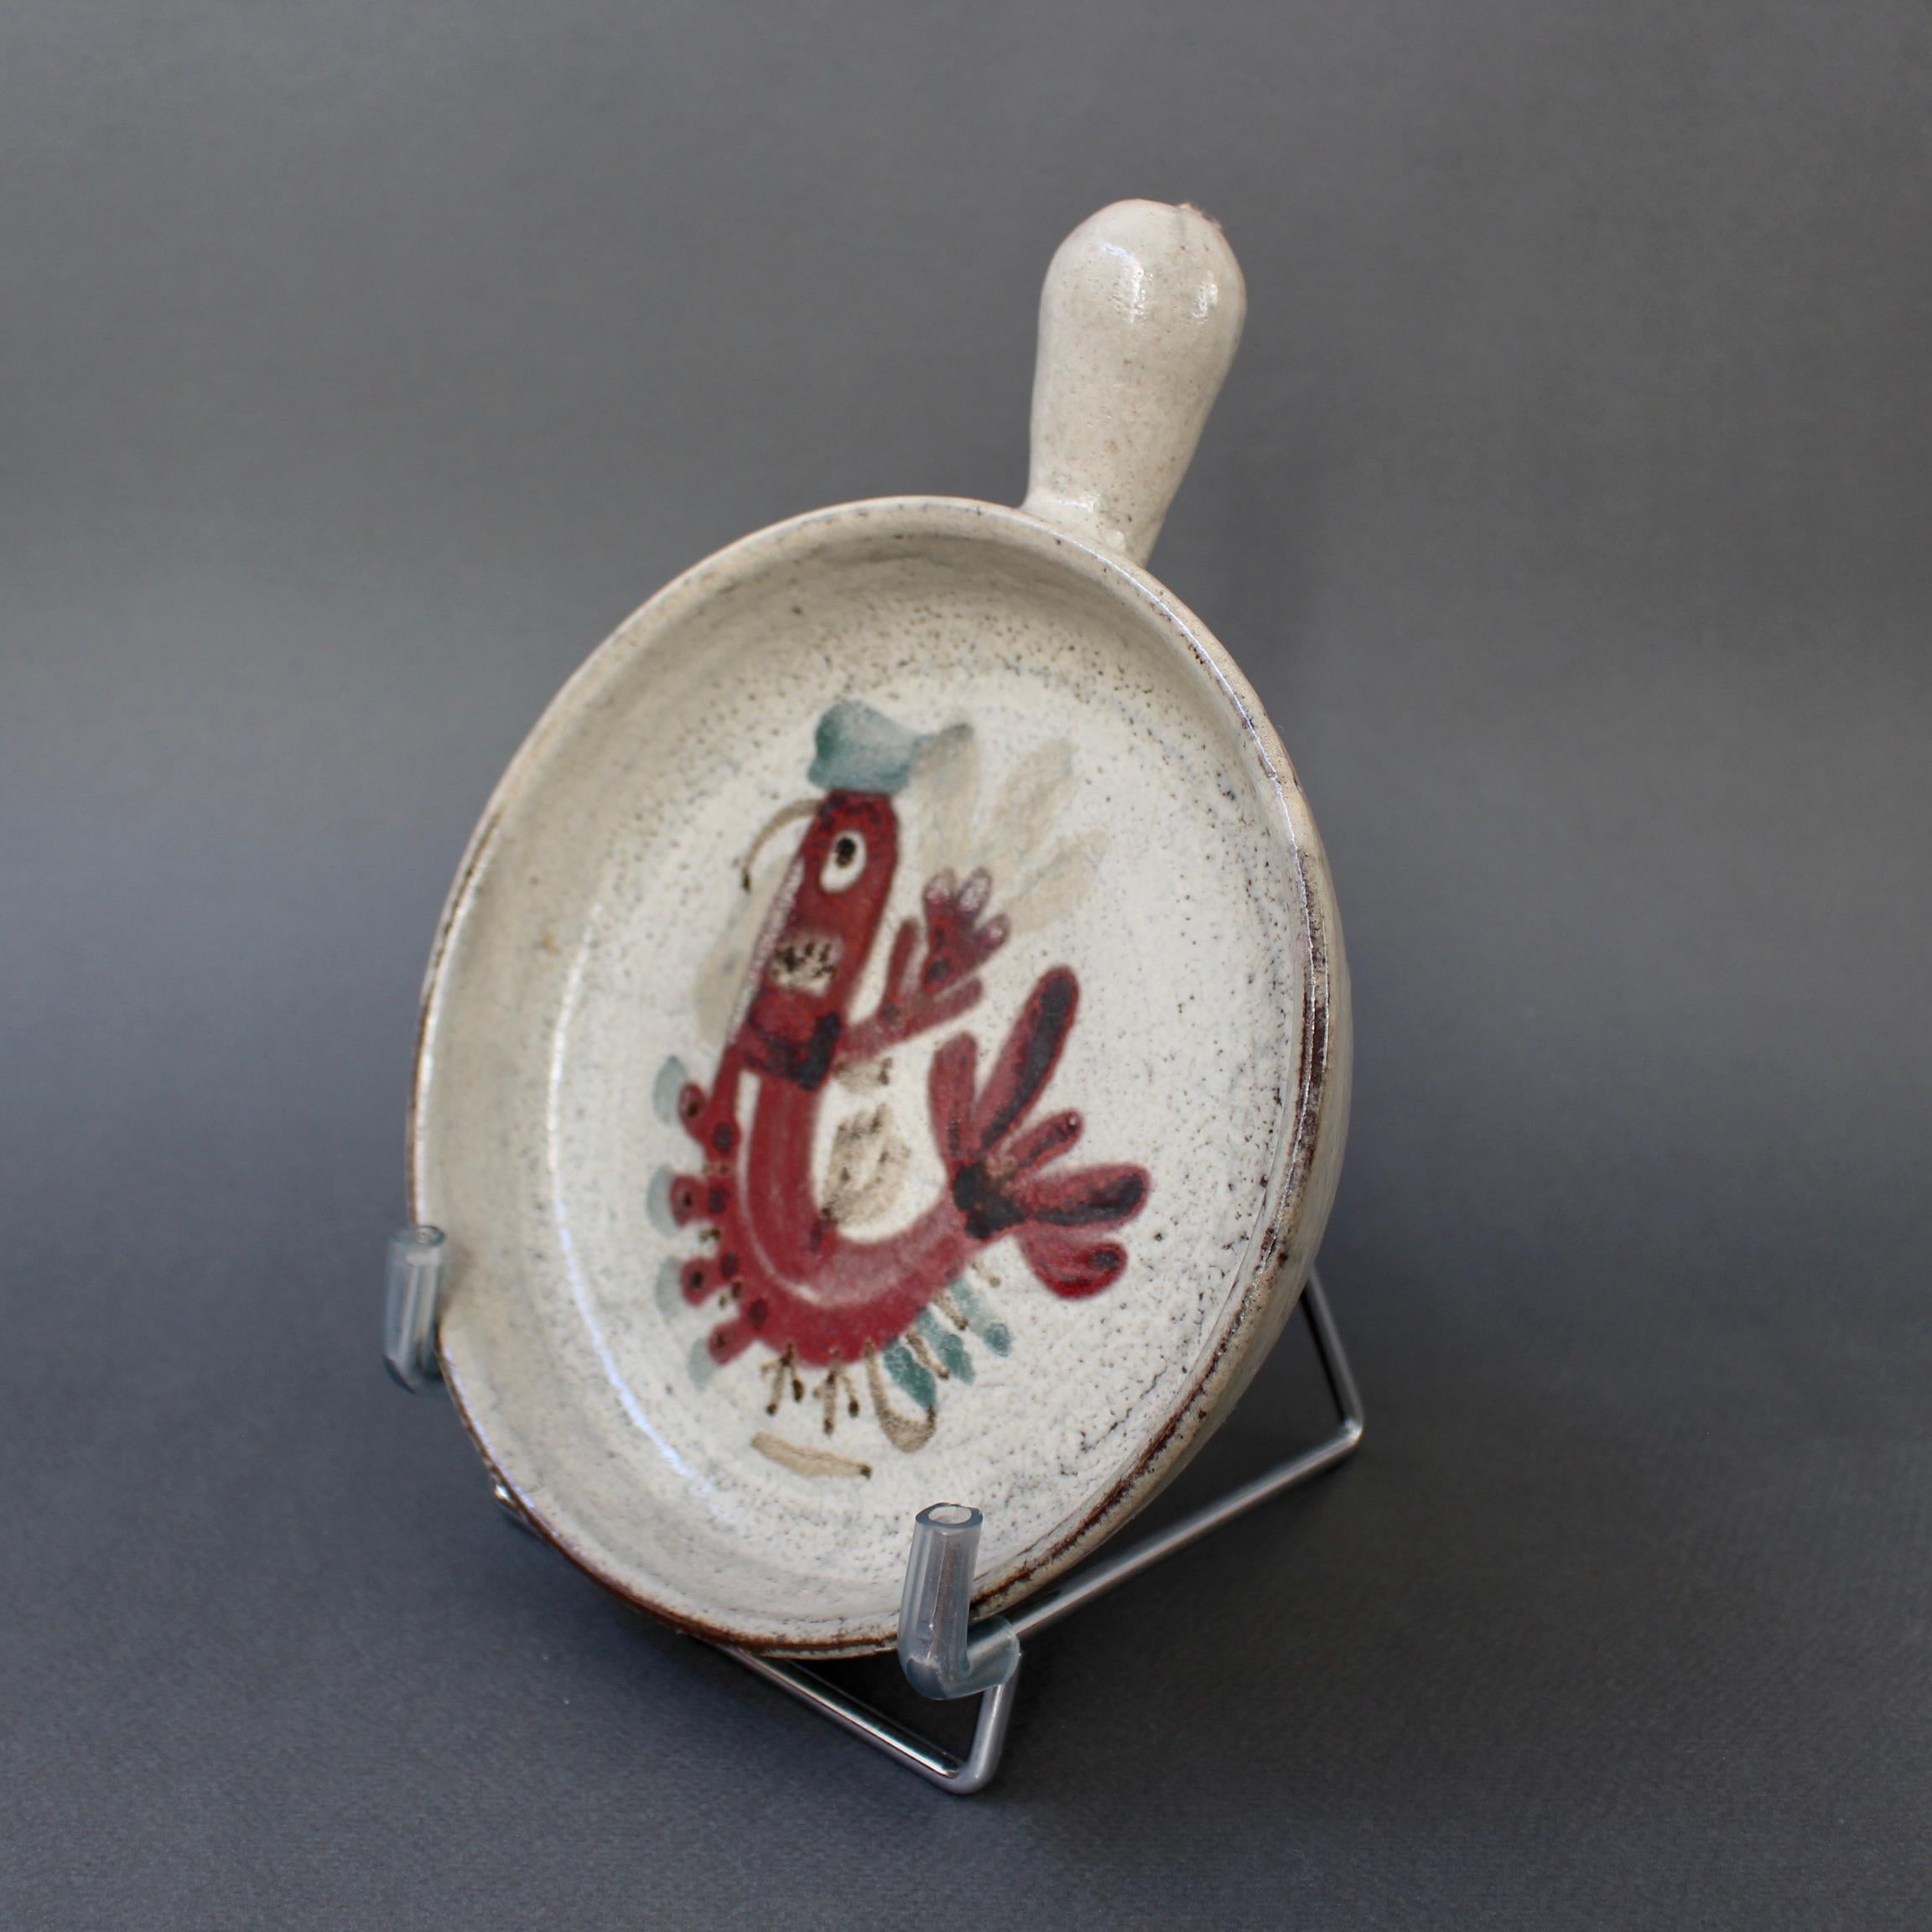 Mid-20th Century French Ceramic Decorative Serving Dish by Gustave Reynaud, Le Mûrier, c. 1960s For Sale